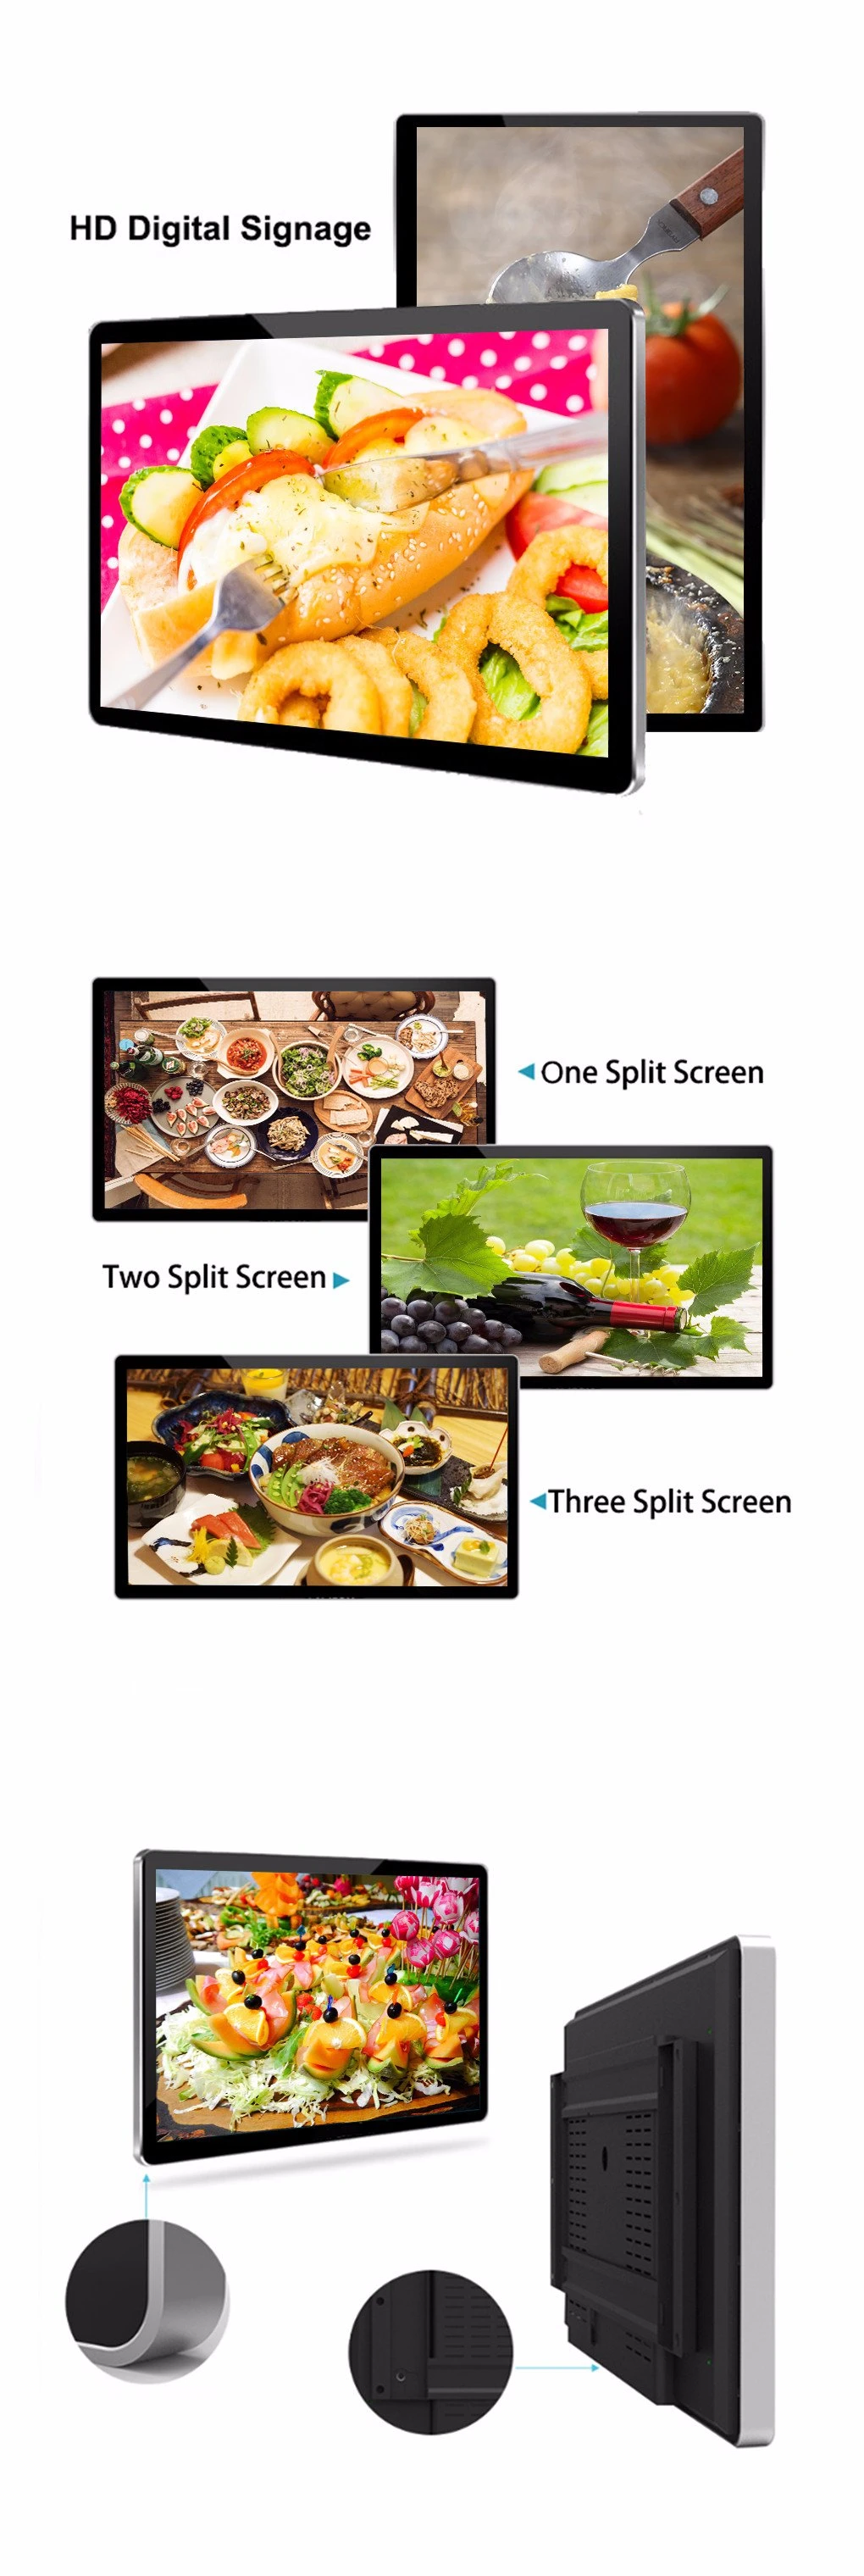 32 Inch Advertising Player Ad Player Ultra-Wall Mount Kiosk Digital Advertising Screens LCD Digital Signage